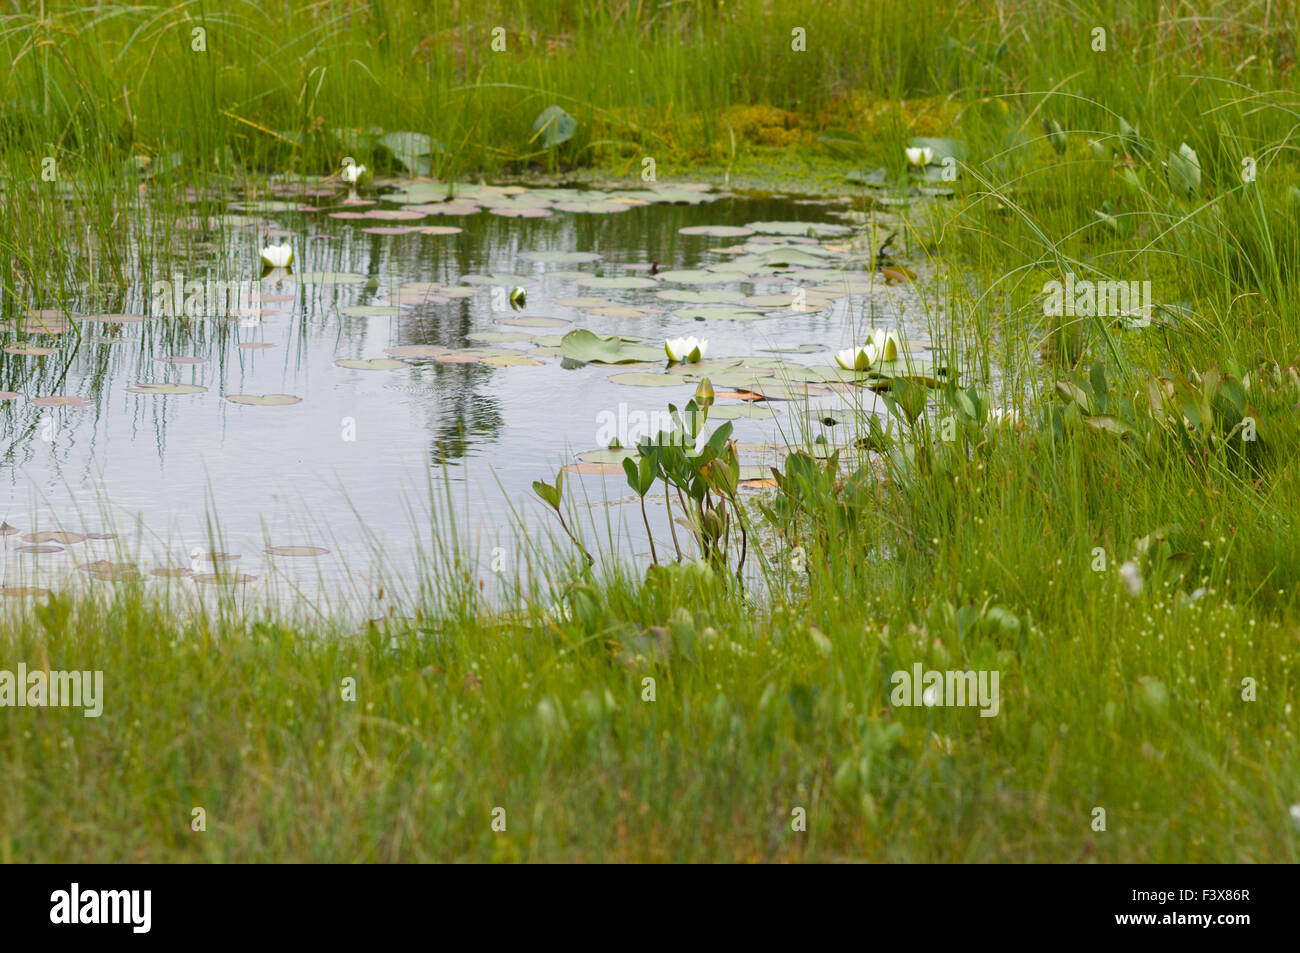 Small pond in bog area with water-lily flowers, selective focus image Stock Photo